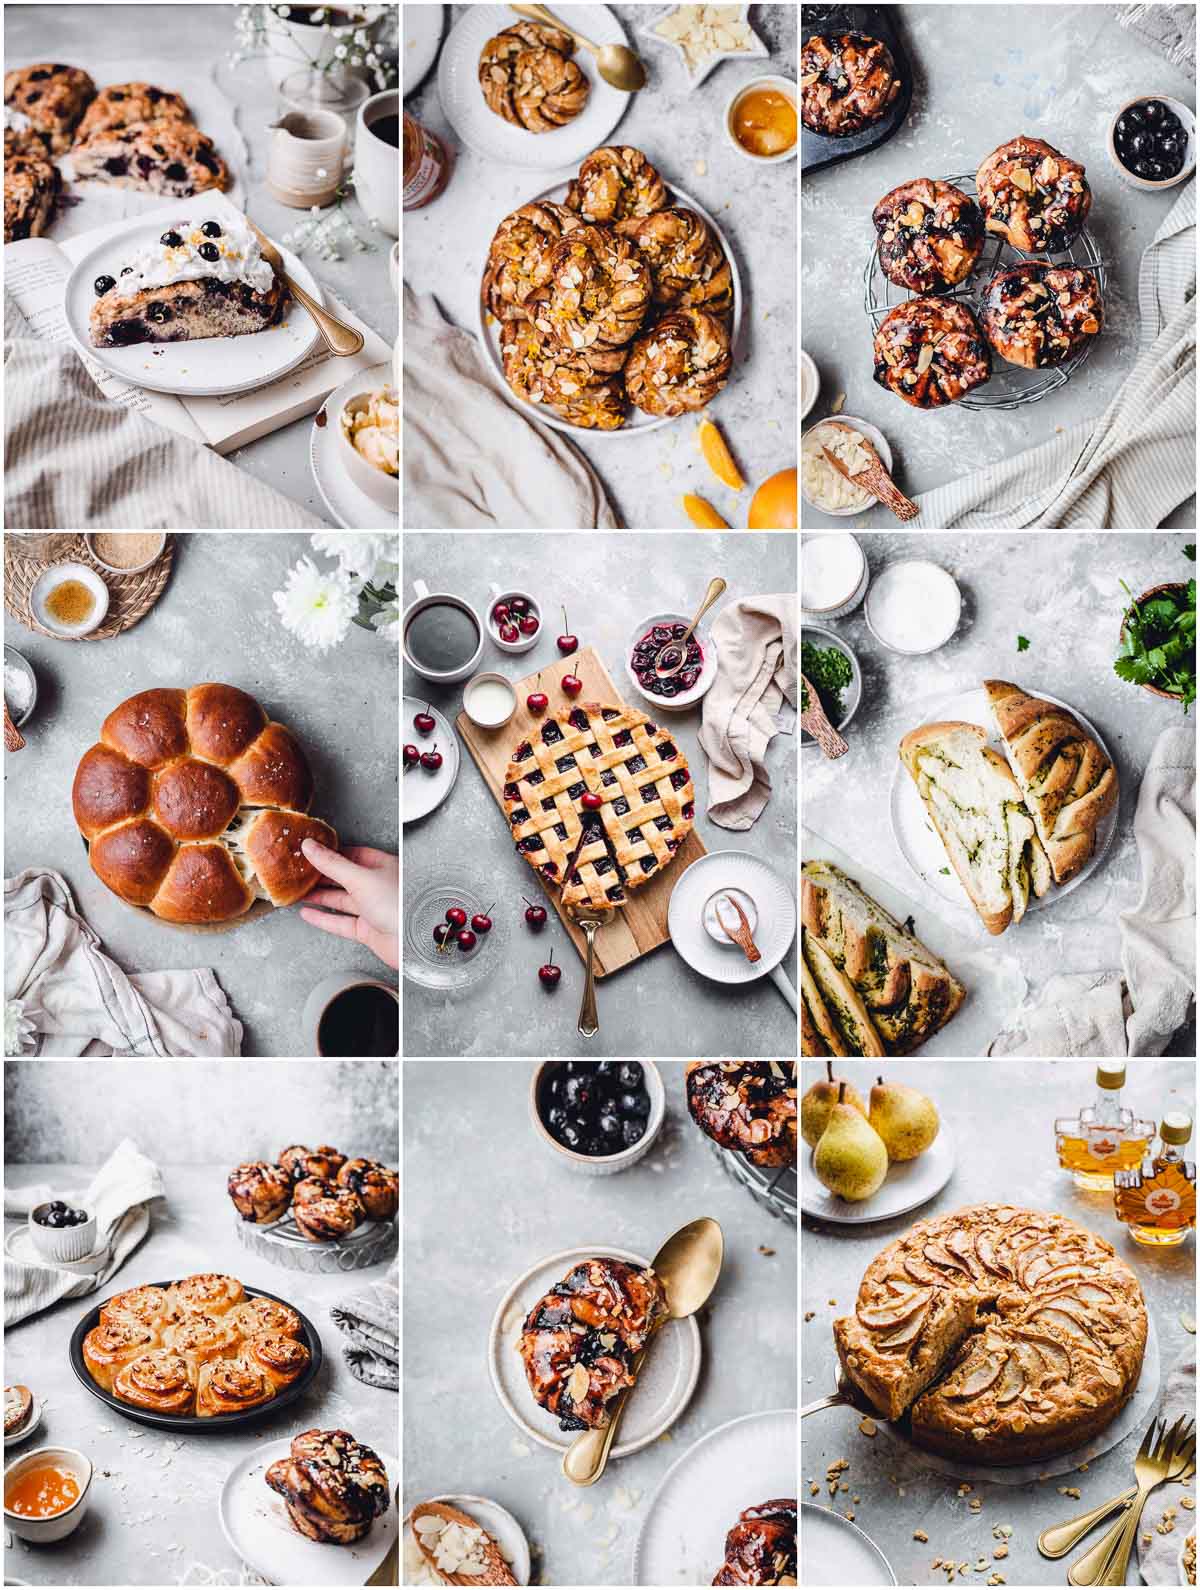 A collage of nine images showing various different baked goods. 